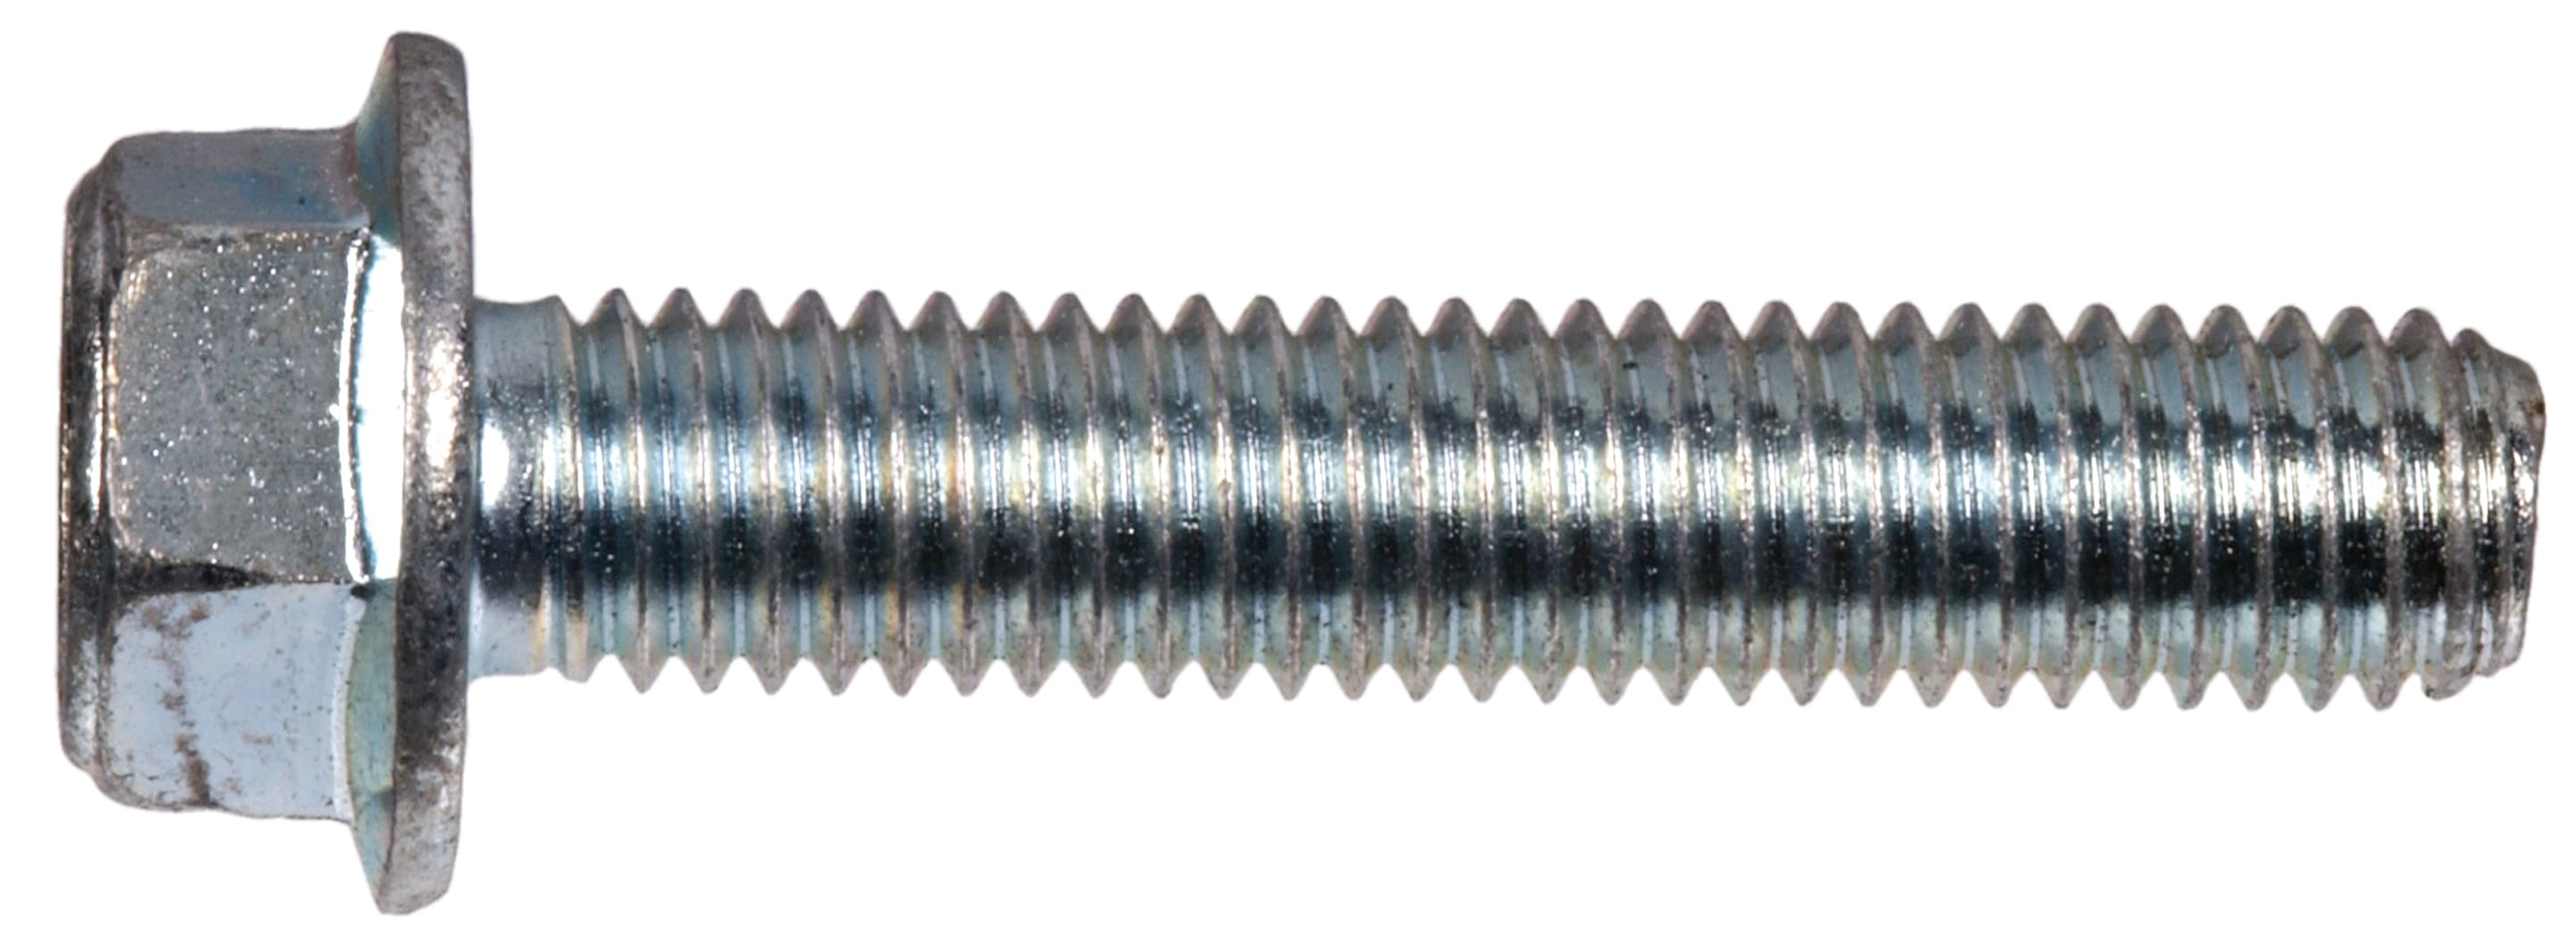 NUTS AND BOLTS M8 x 30mm 20 OFF Hexagon HIGH TENSILE STEEL. 